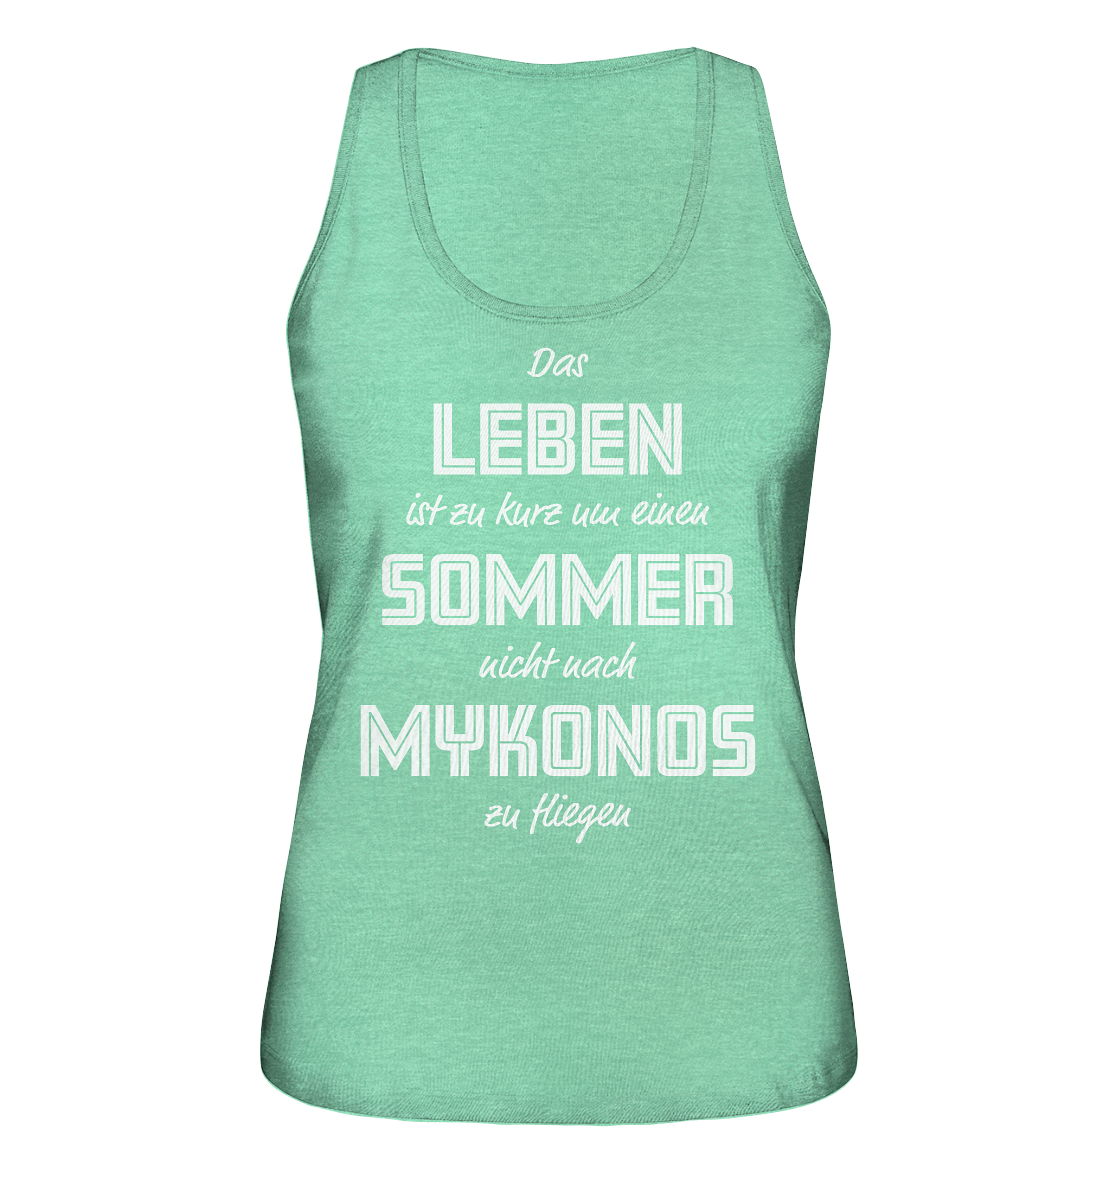 Life is too short not to fly to Mykonos for a summer - Ladies Organic Tank Top